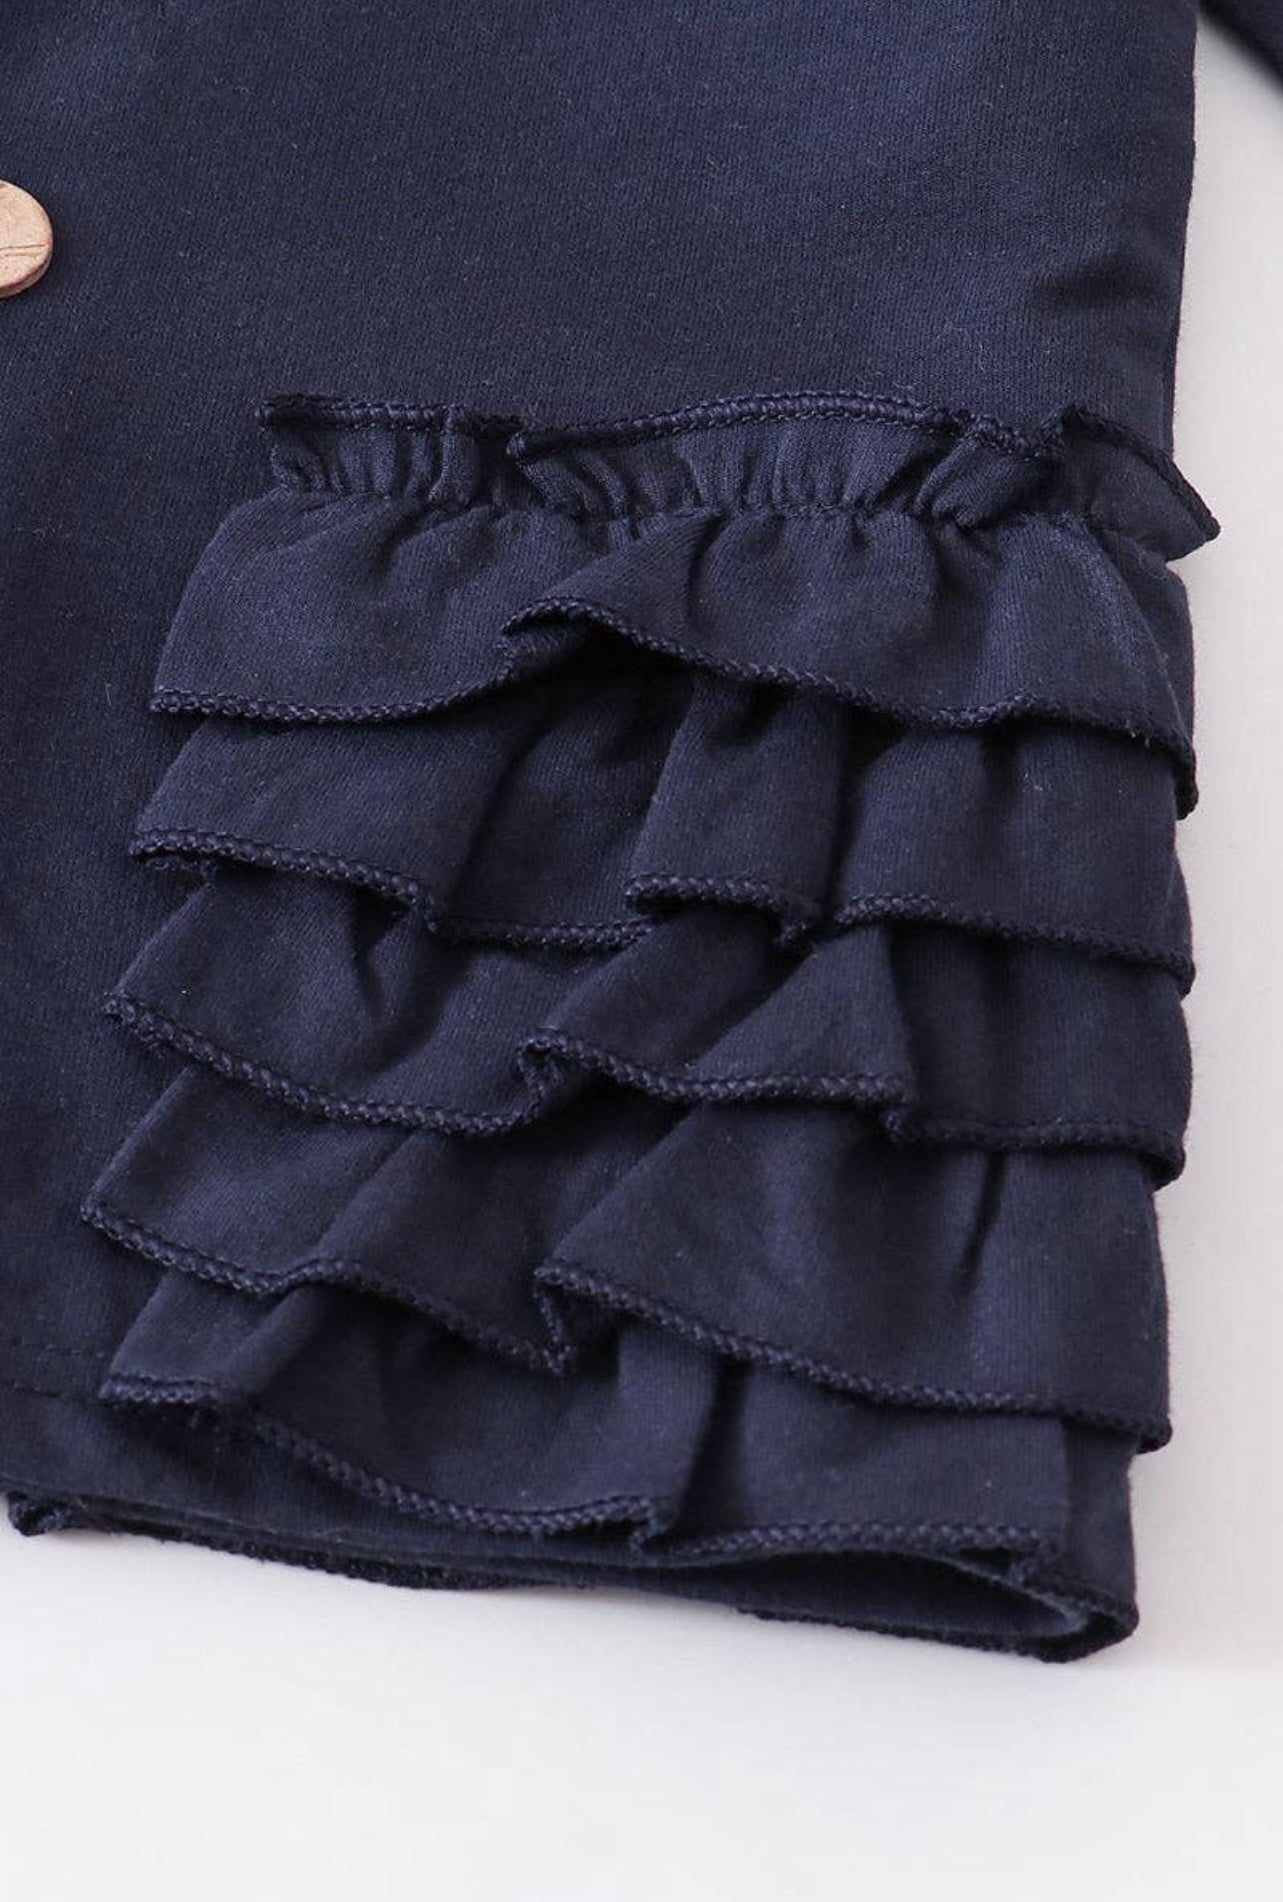 Navy ruffle button down hoodie jacket